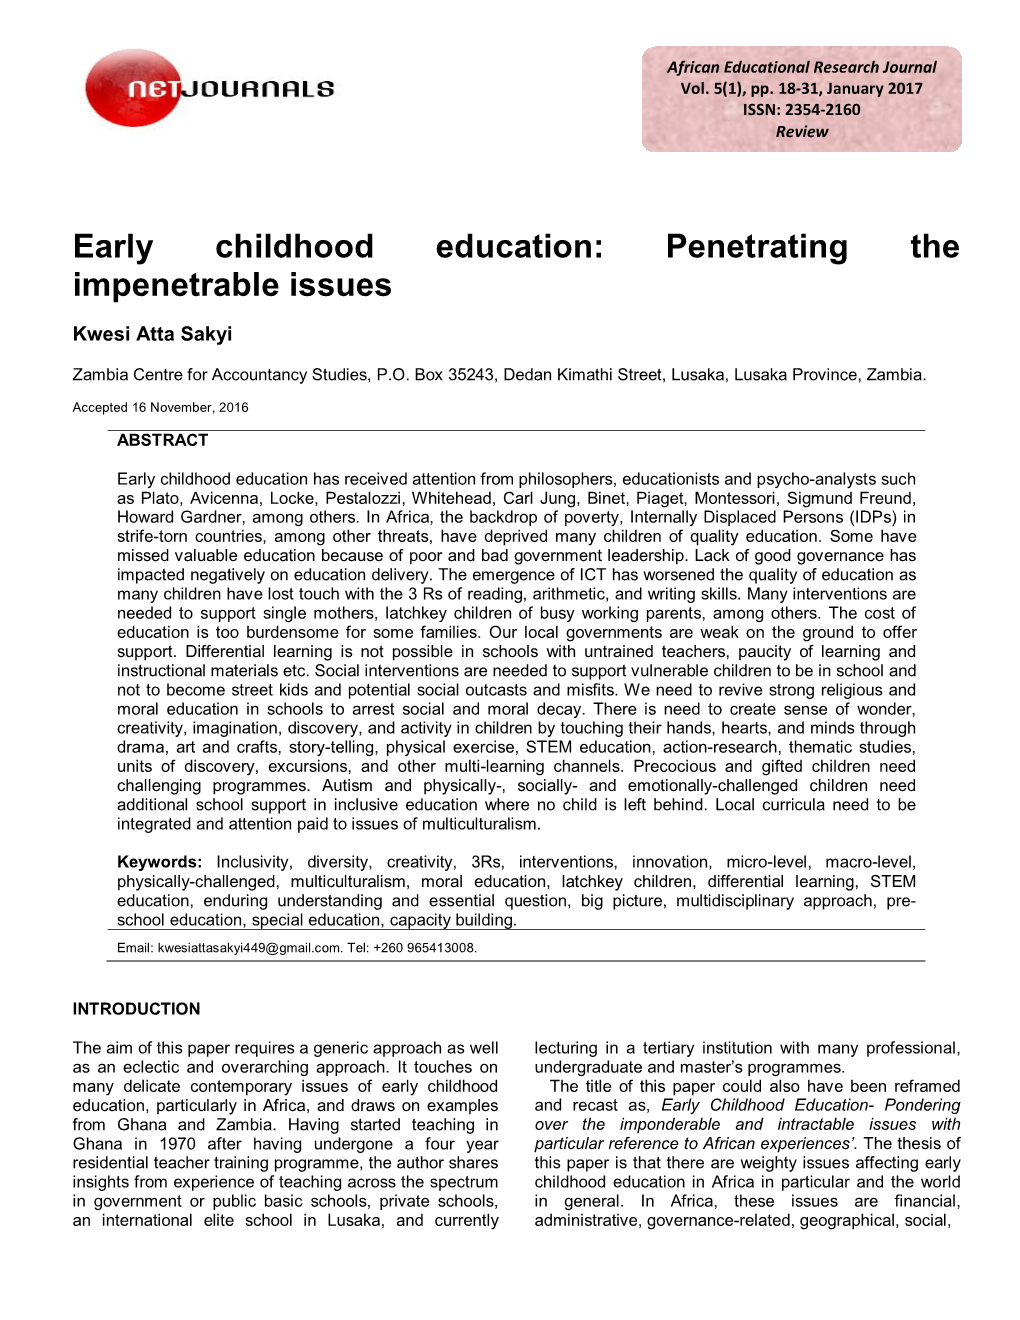 Early Childhood Education: Penetrating the Impenetrable Issues